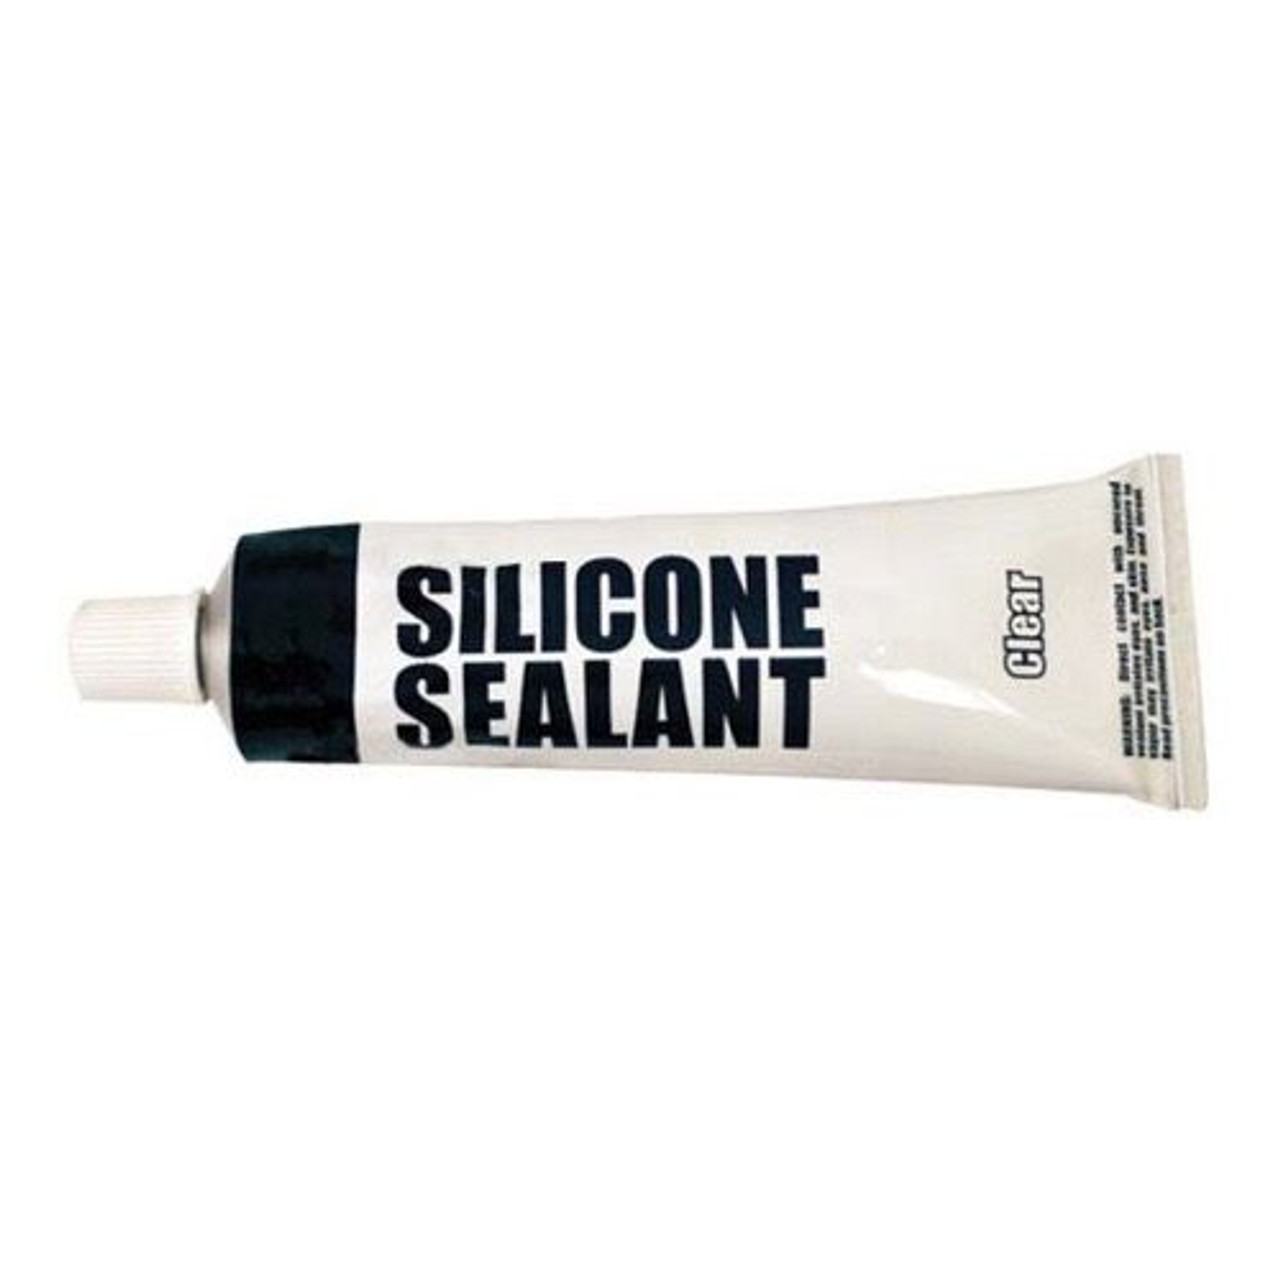 Perfect Vision RTV Silicone Sealant 3 oz Tube SG3-P1 Clear Rubber Waterproof Tube Adhesive Outdoor Off-Air Audio Video TV Antenna Satellite Dish Coax Cable F Connector Weatherproof Fitting Bonding Flexible Filler